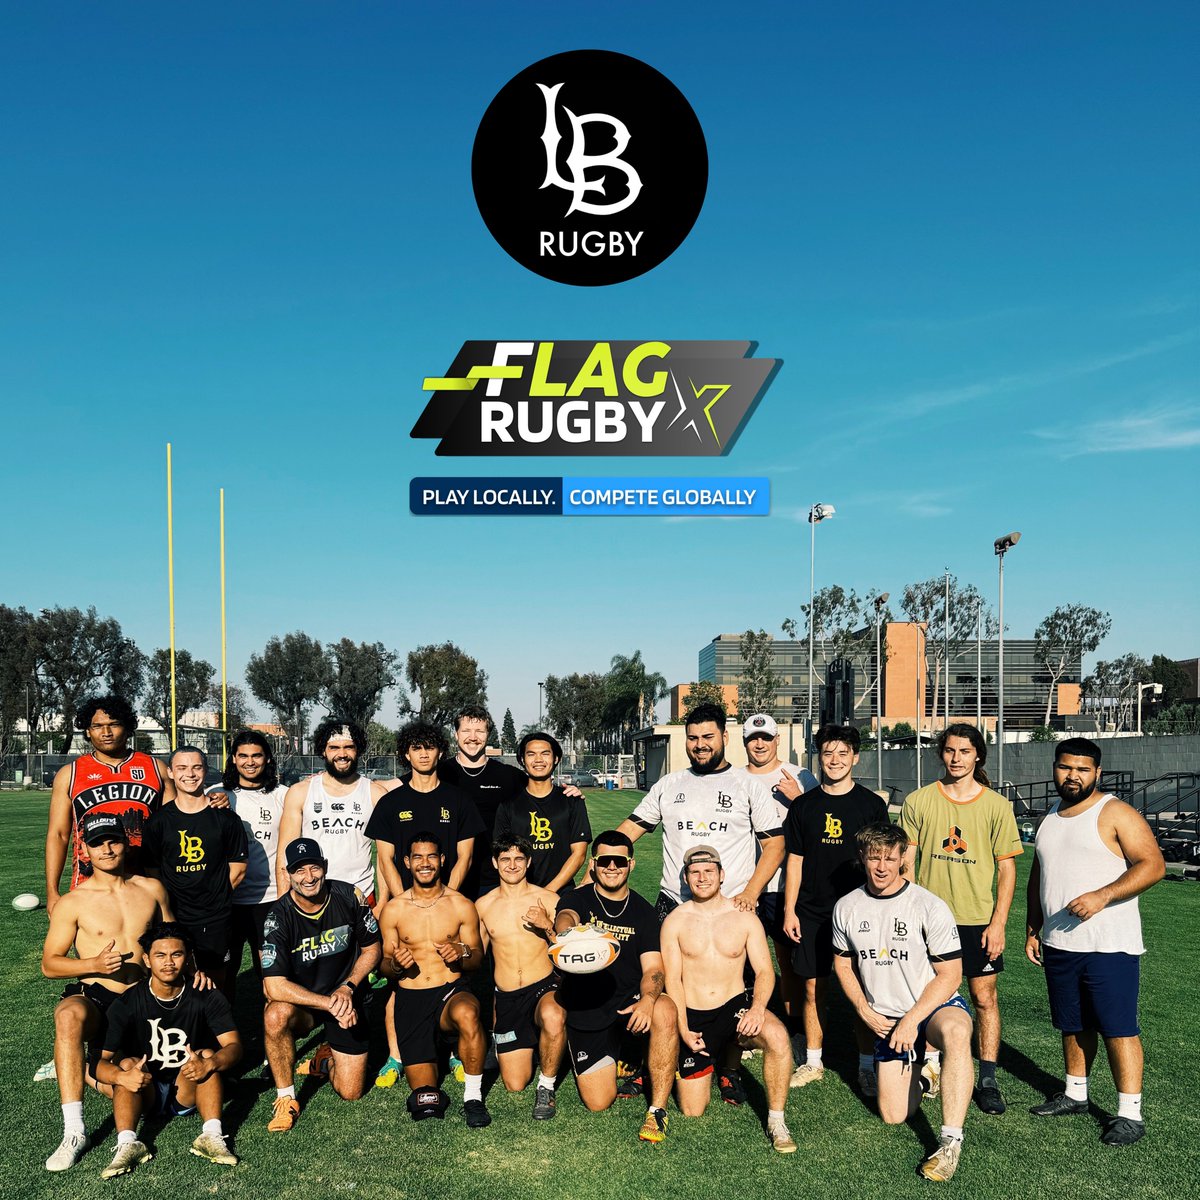 Awesome Flag X event at @LB49erRugby with these Sleek Sensations! Plenty of highlights, lots of laughs and some Champagne Rugby 🎥 ➡️ tagxinternational.com @SpeedSt11ck